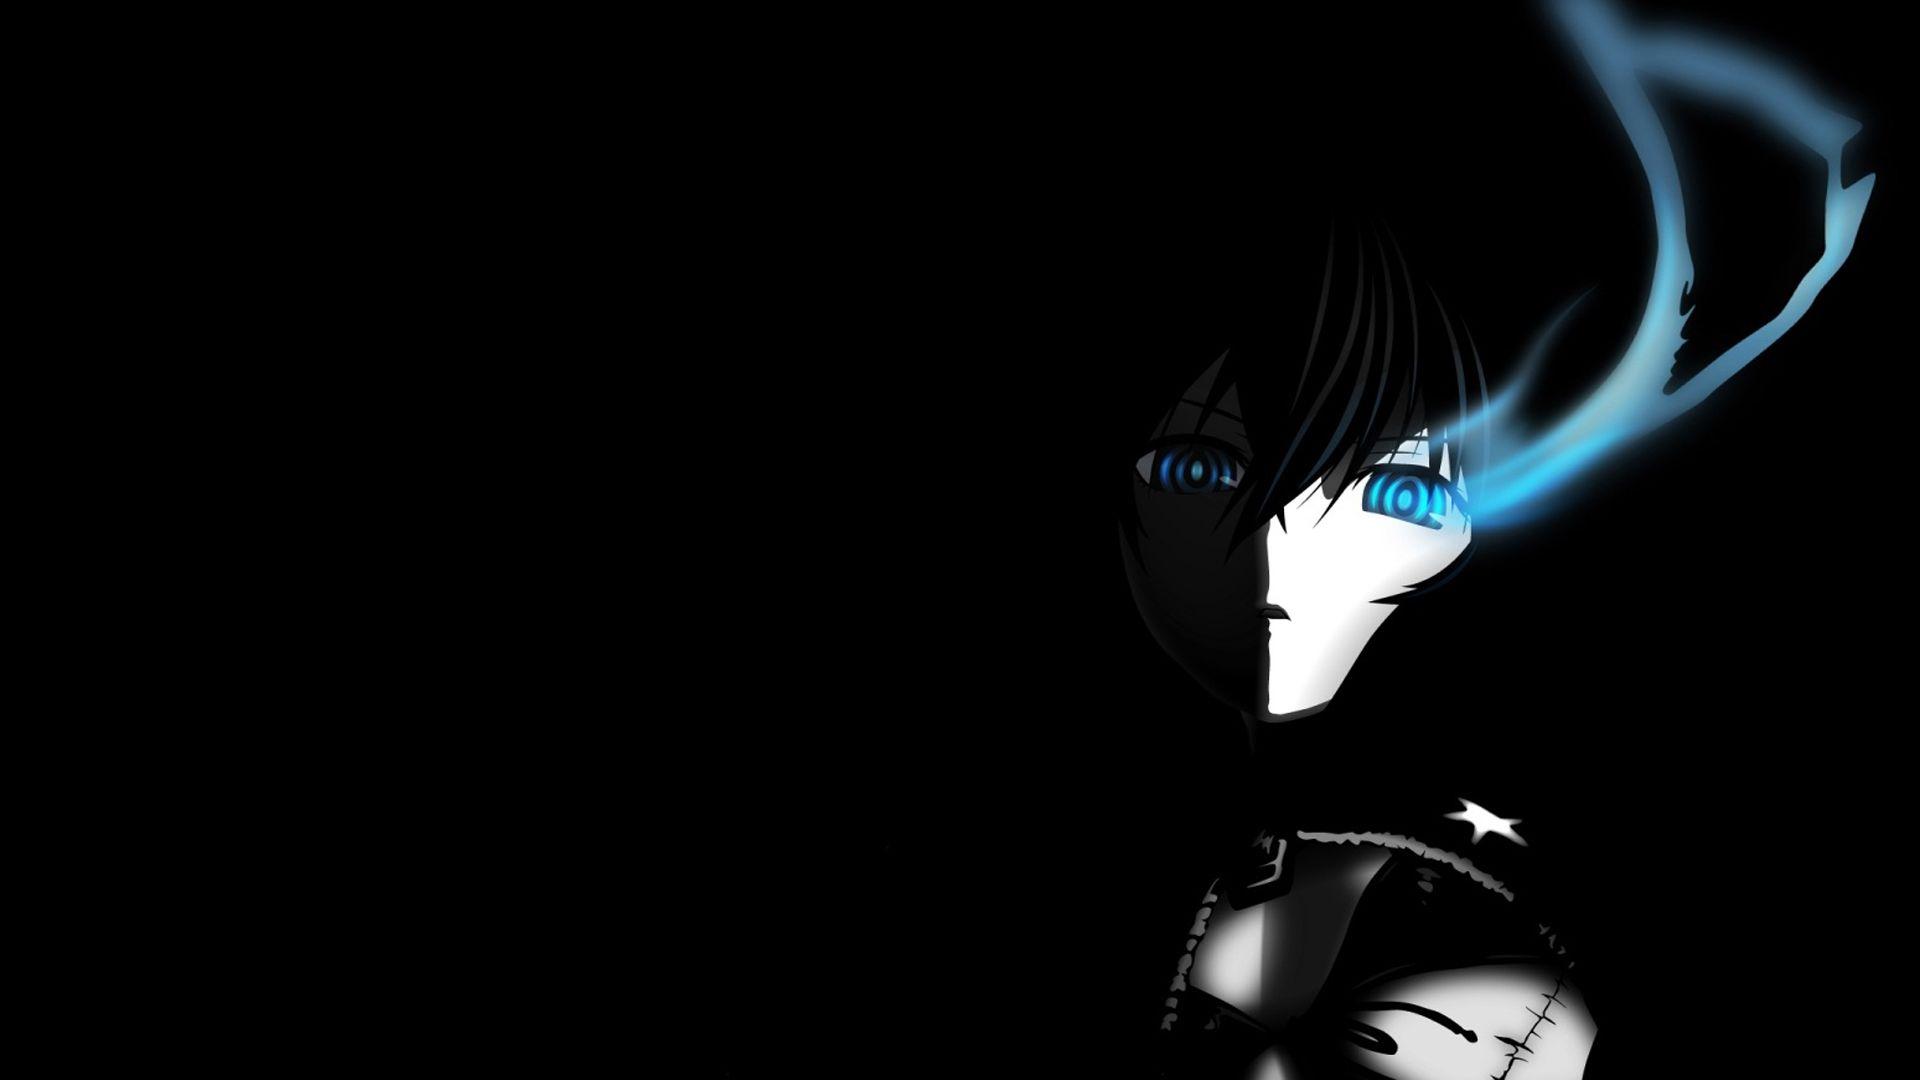  Anime  Black  Wallpapers  Wallpaper  Cave